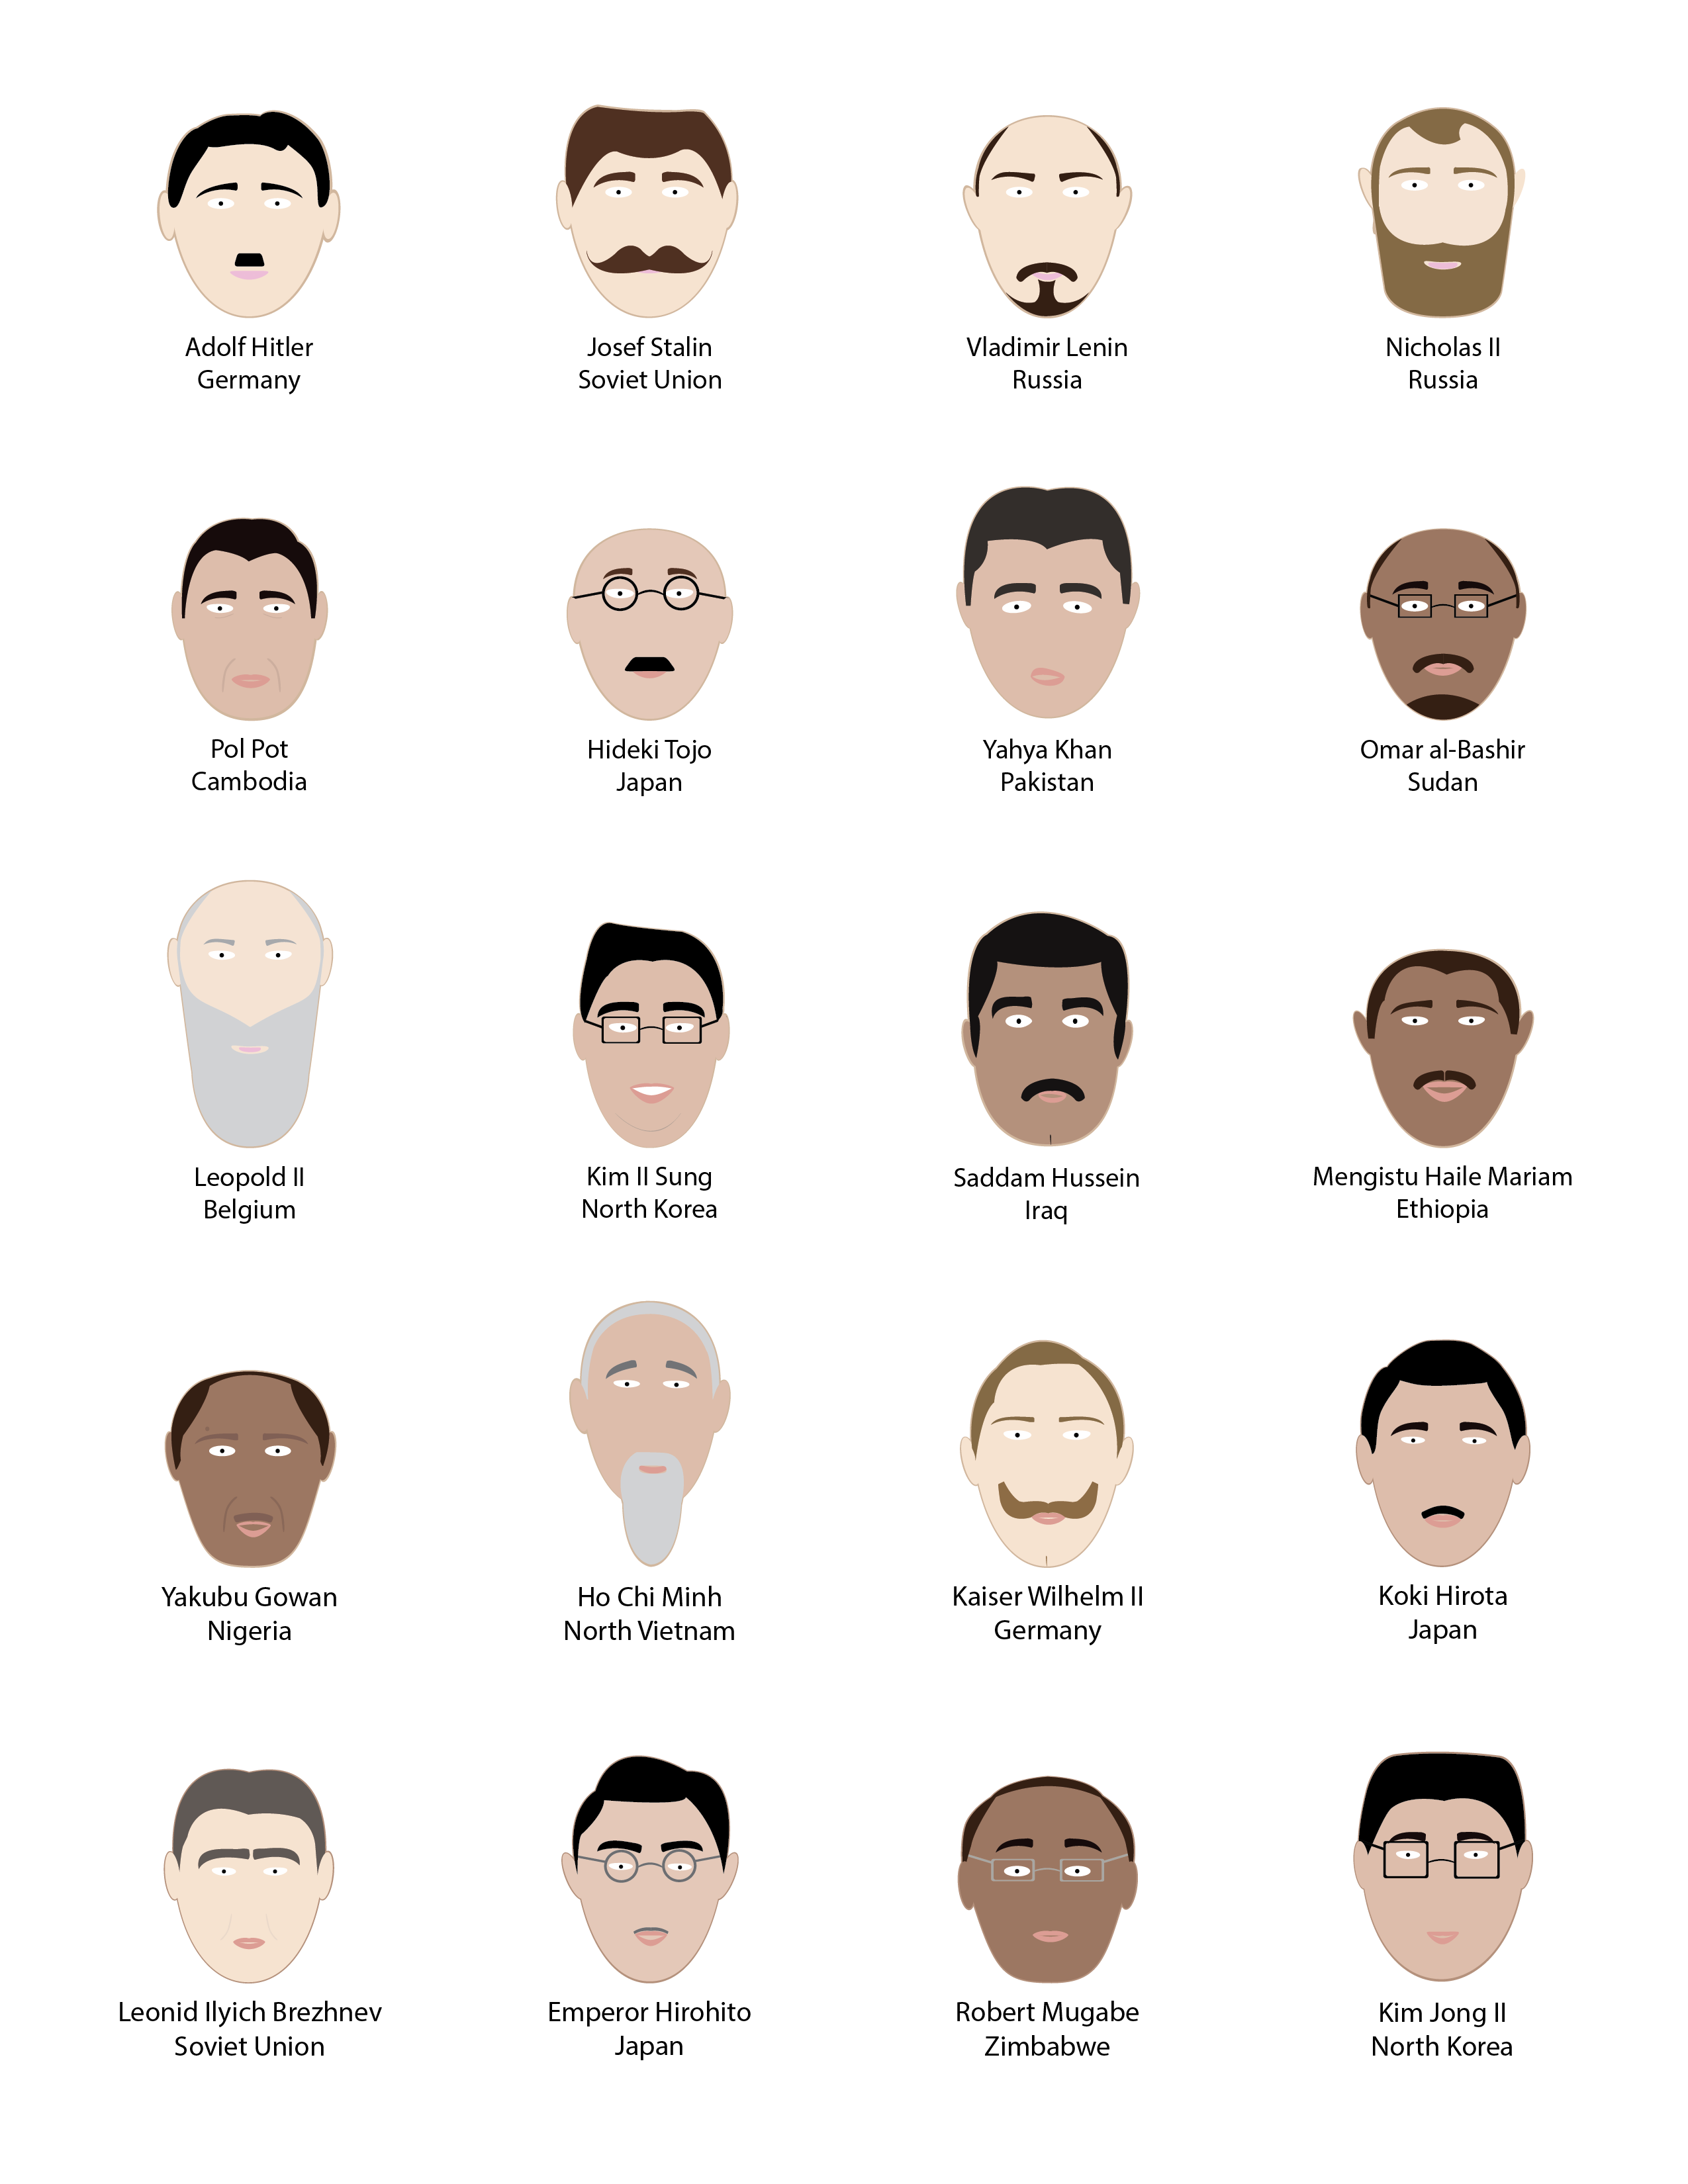 famous dictators of the world